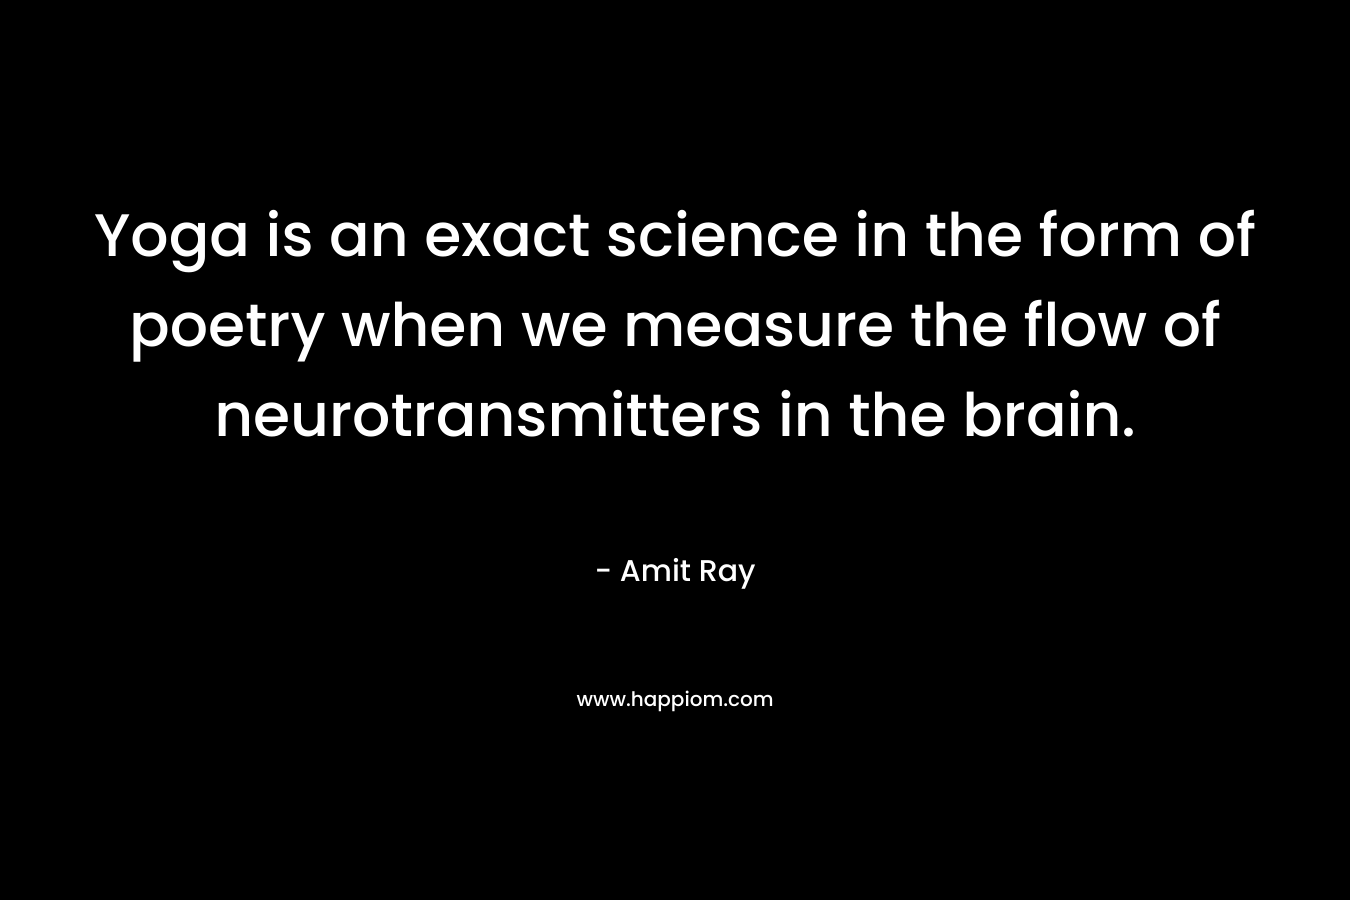 Yoga is an exact science in the form of poetry when we measure the flow of neurotransmitters in the brain.